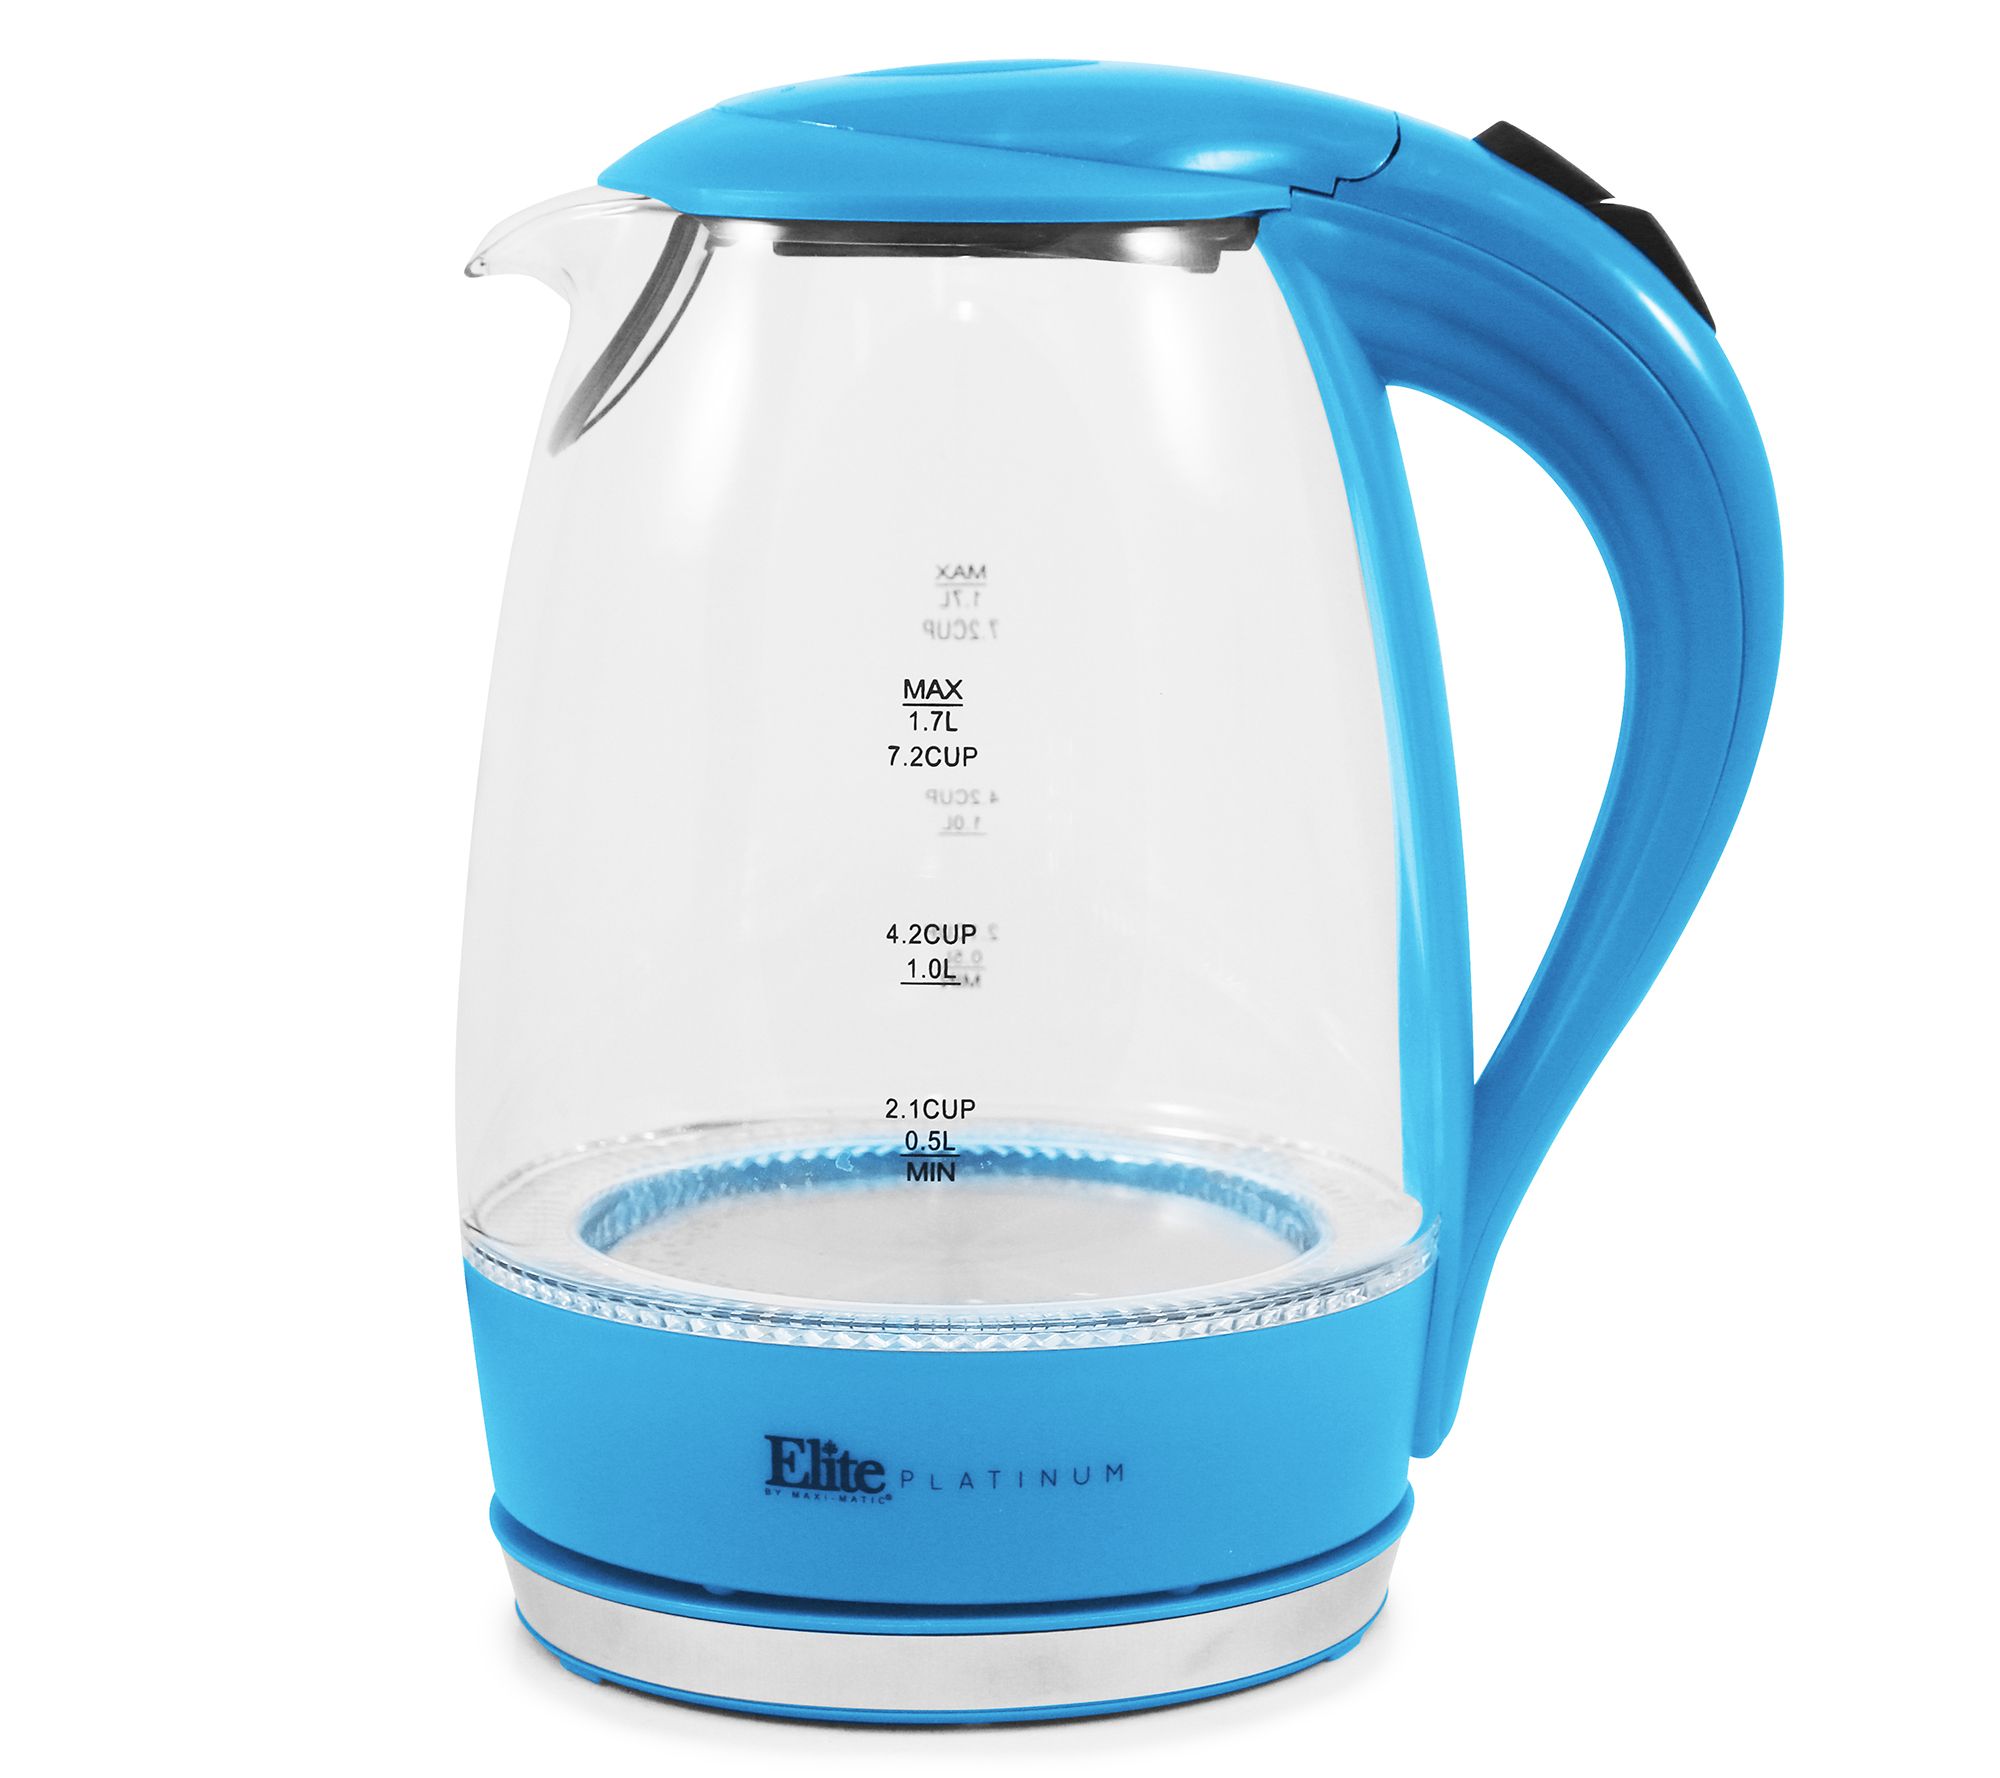 Elite Platinum 1.7L Stainless Steel Cordless Electric Kettle